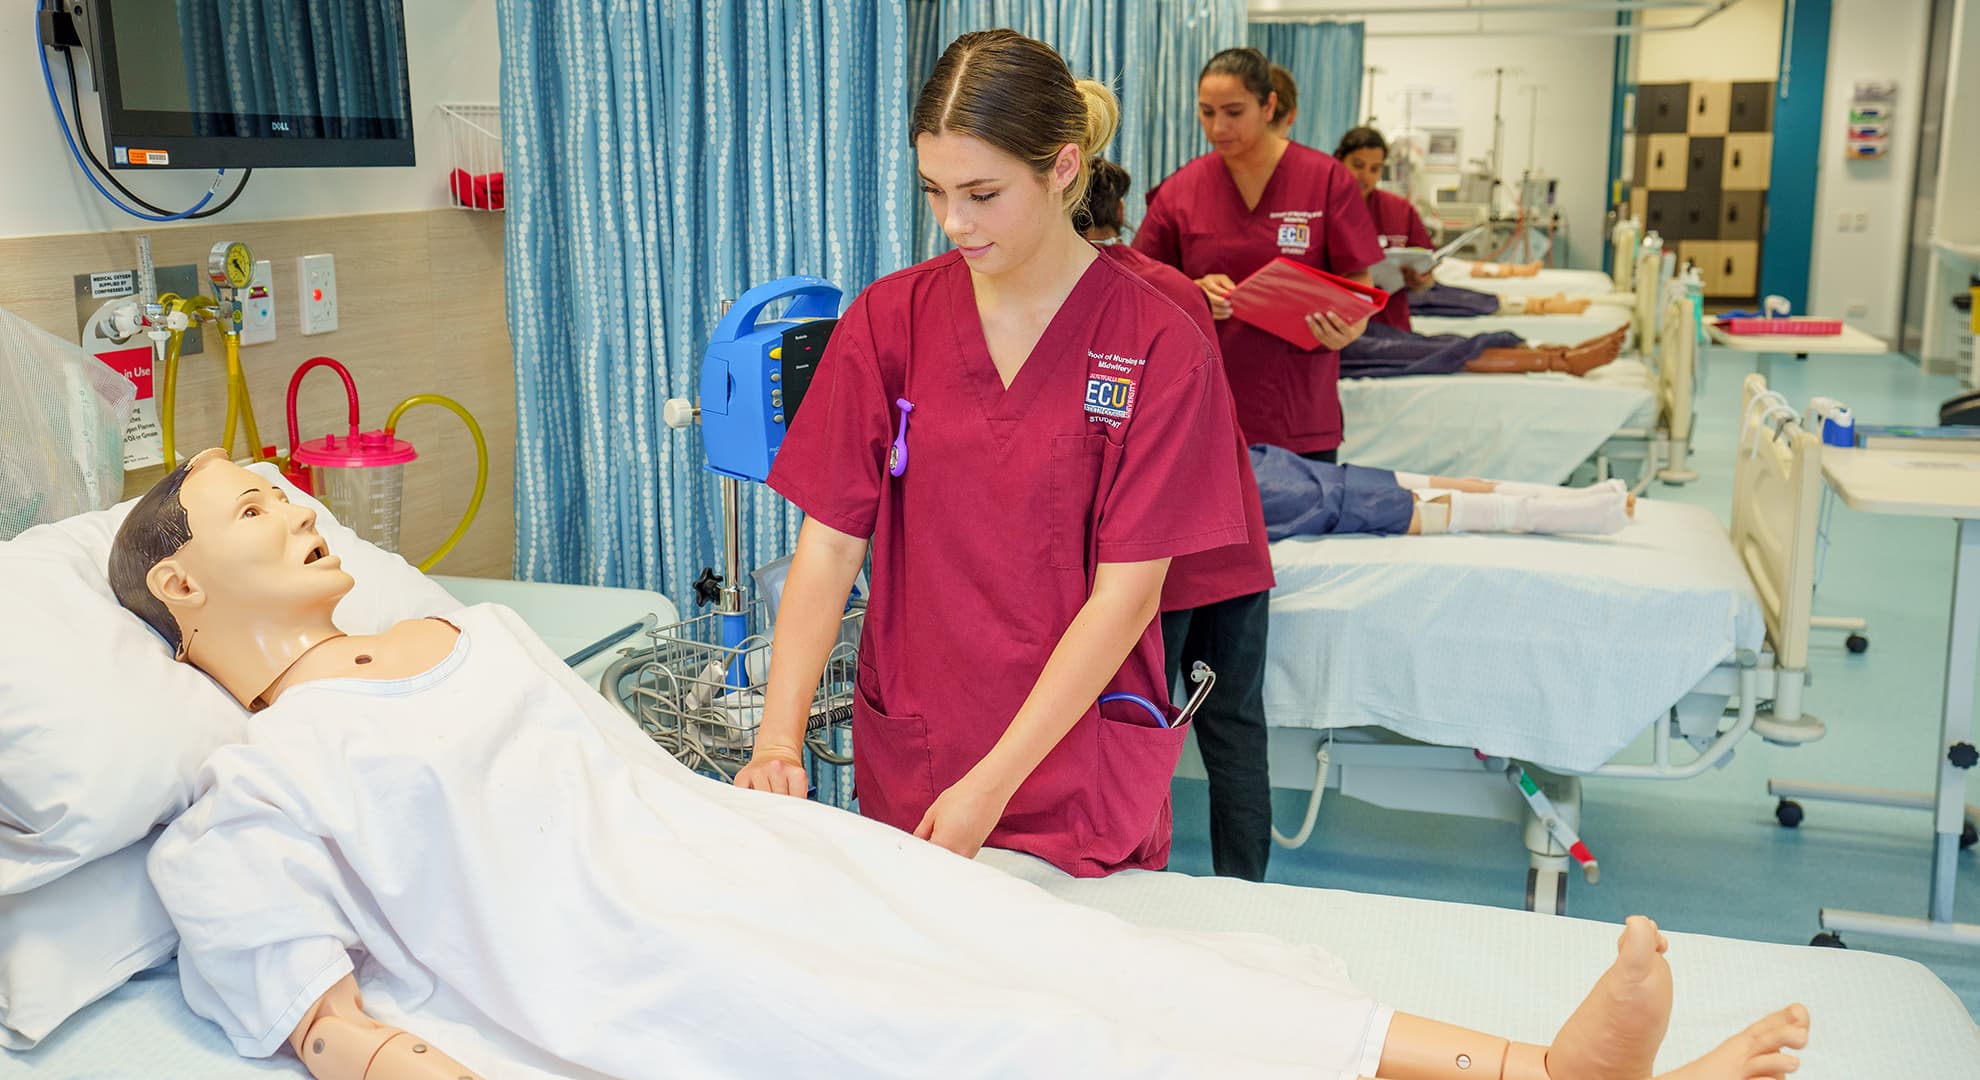 Nursing students attending to dummy patients